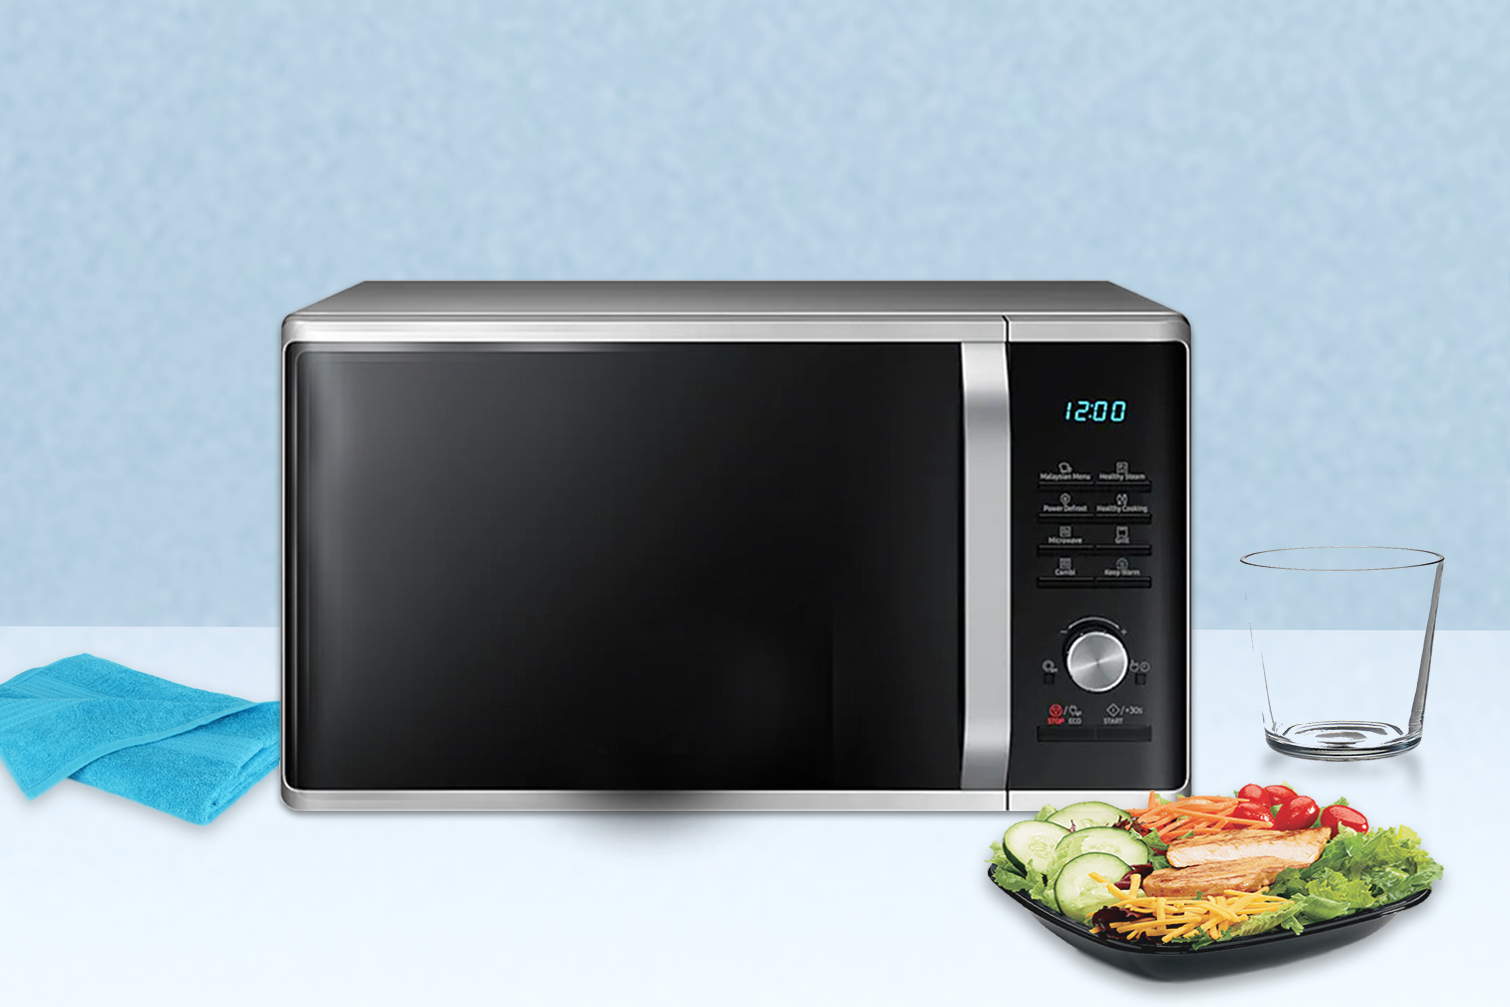 TR Microwave Oven